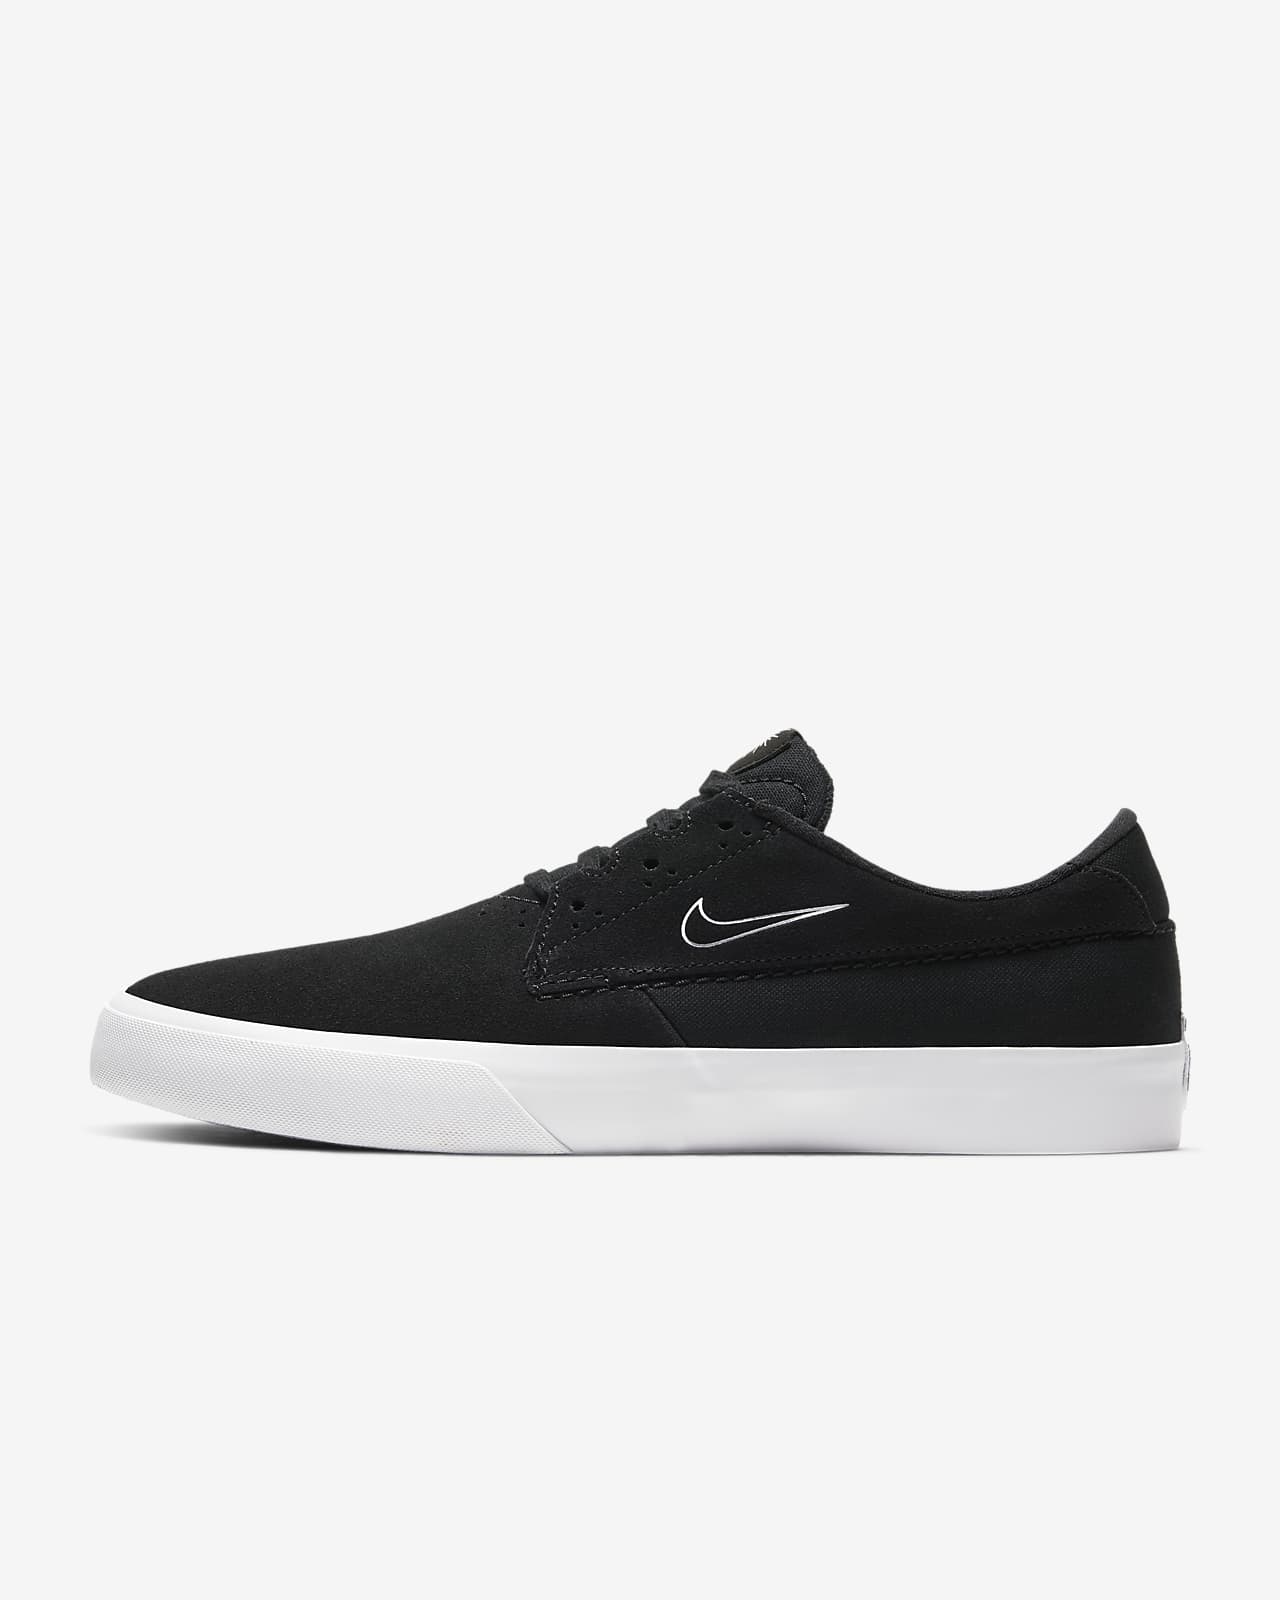 nike sk8 shoes